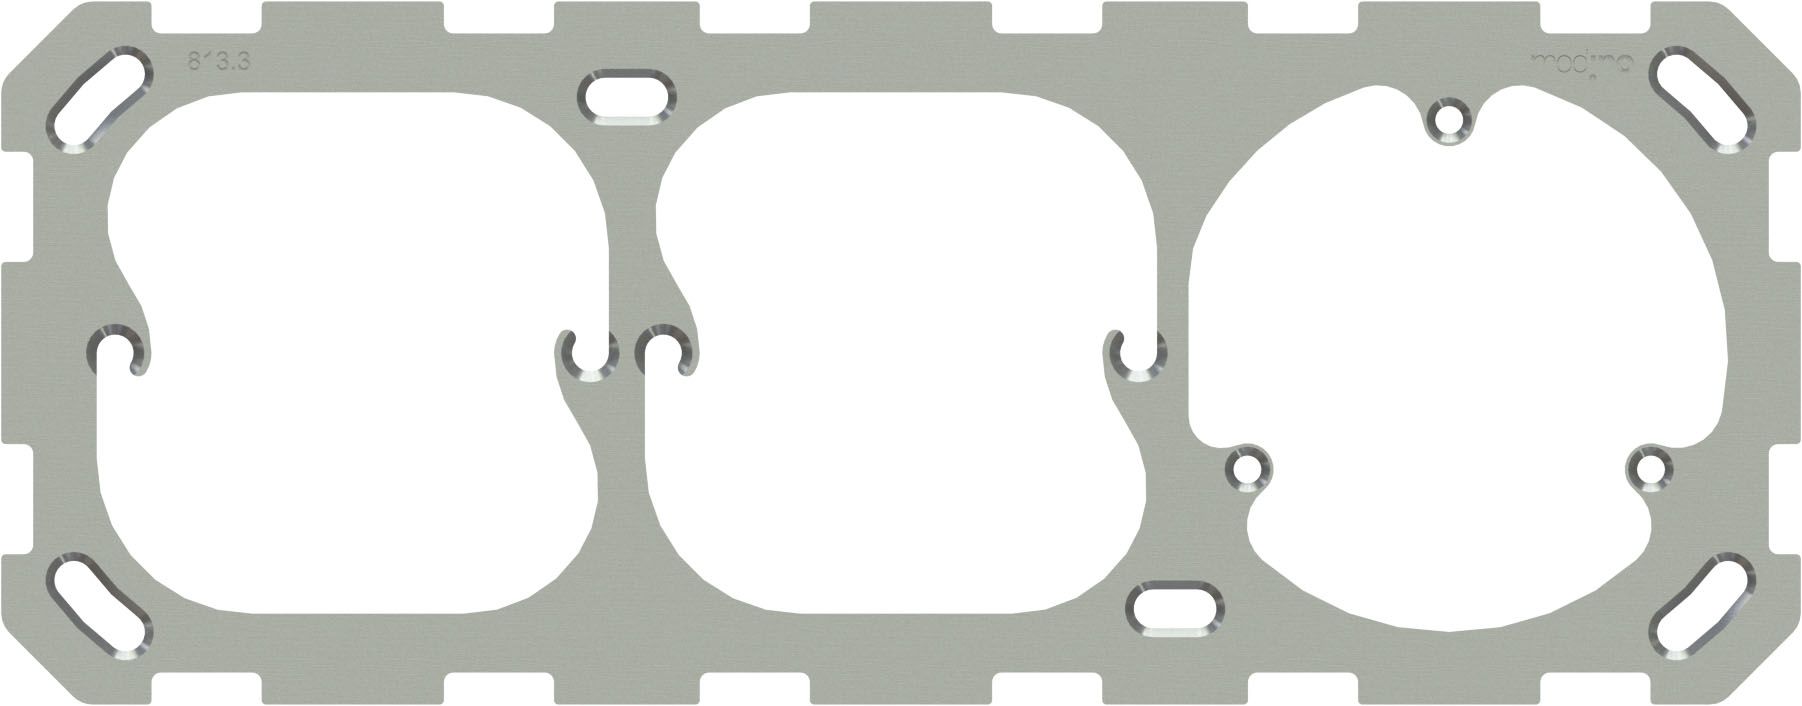 Fixing plate size 1x3 horizontal for socket 3x t13